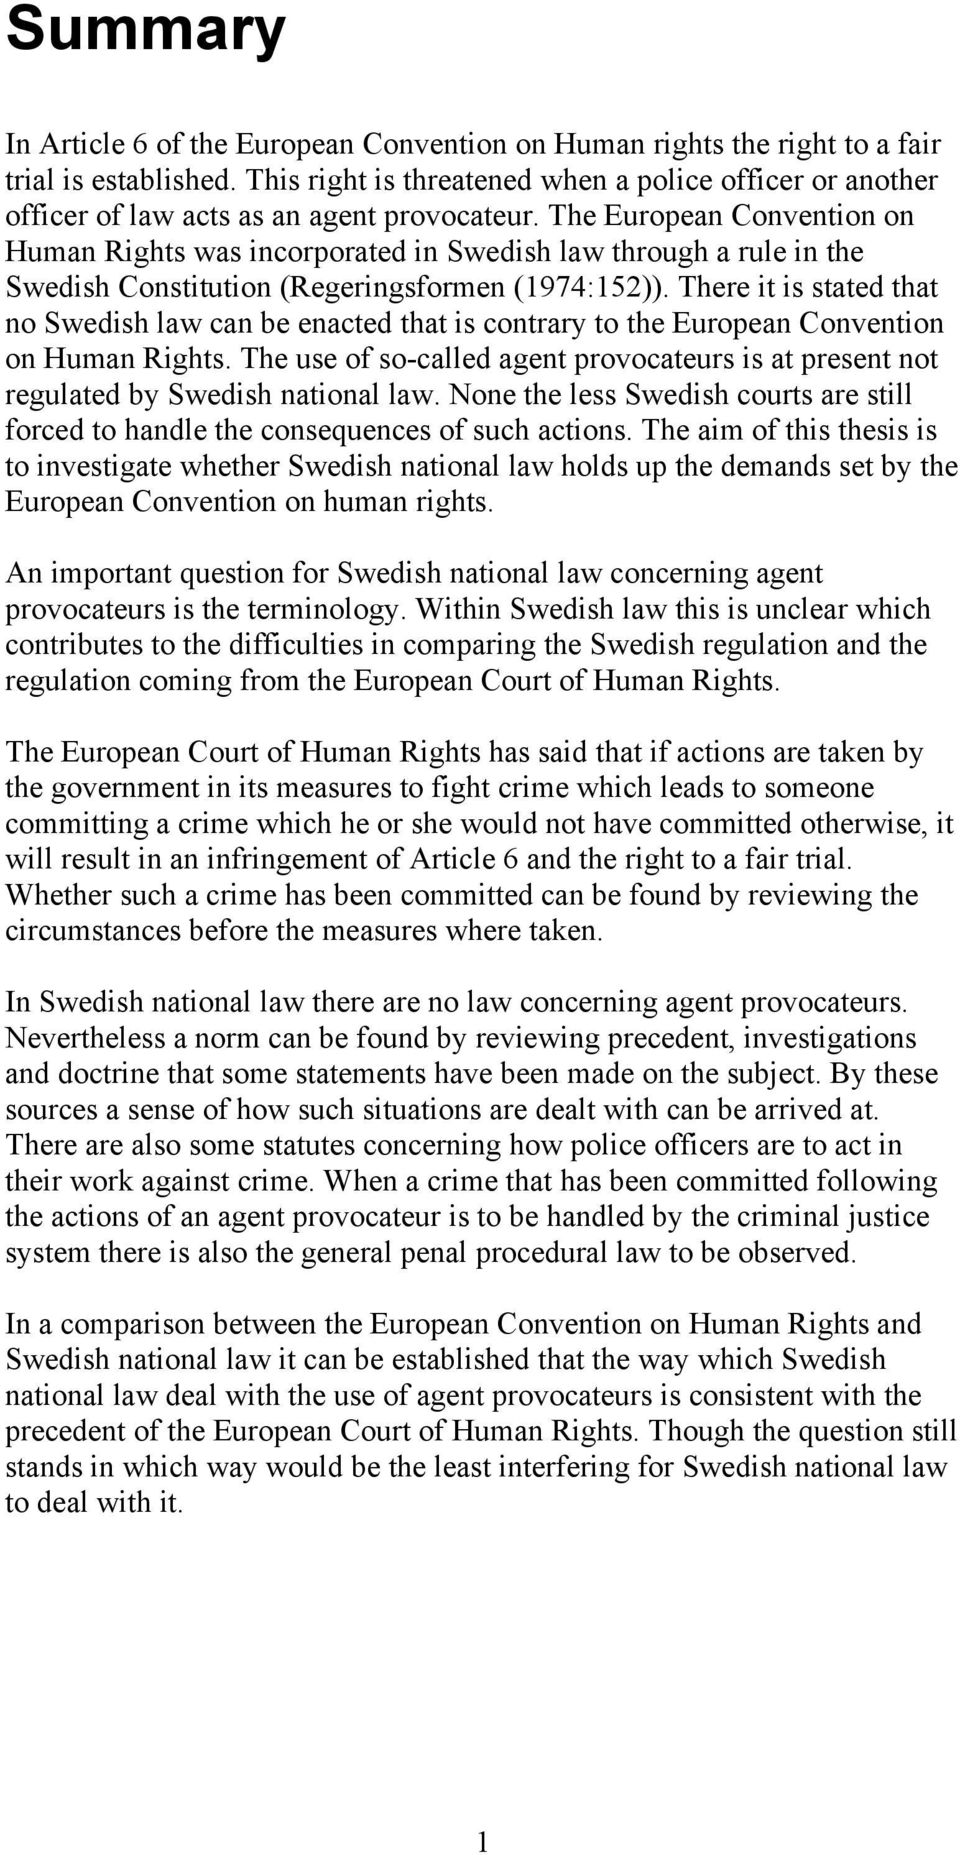 The European Convention on Human Rights was incorporated in Swedish law through a rule in the Swedish Constitution (Regeringsformen (1974:152)).